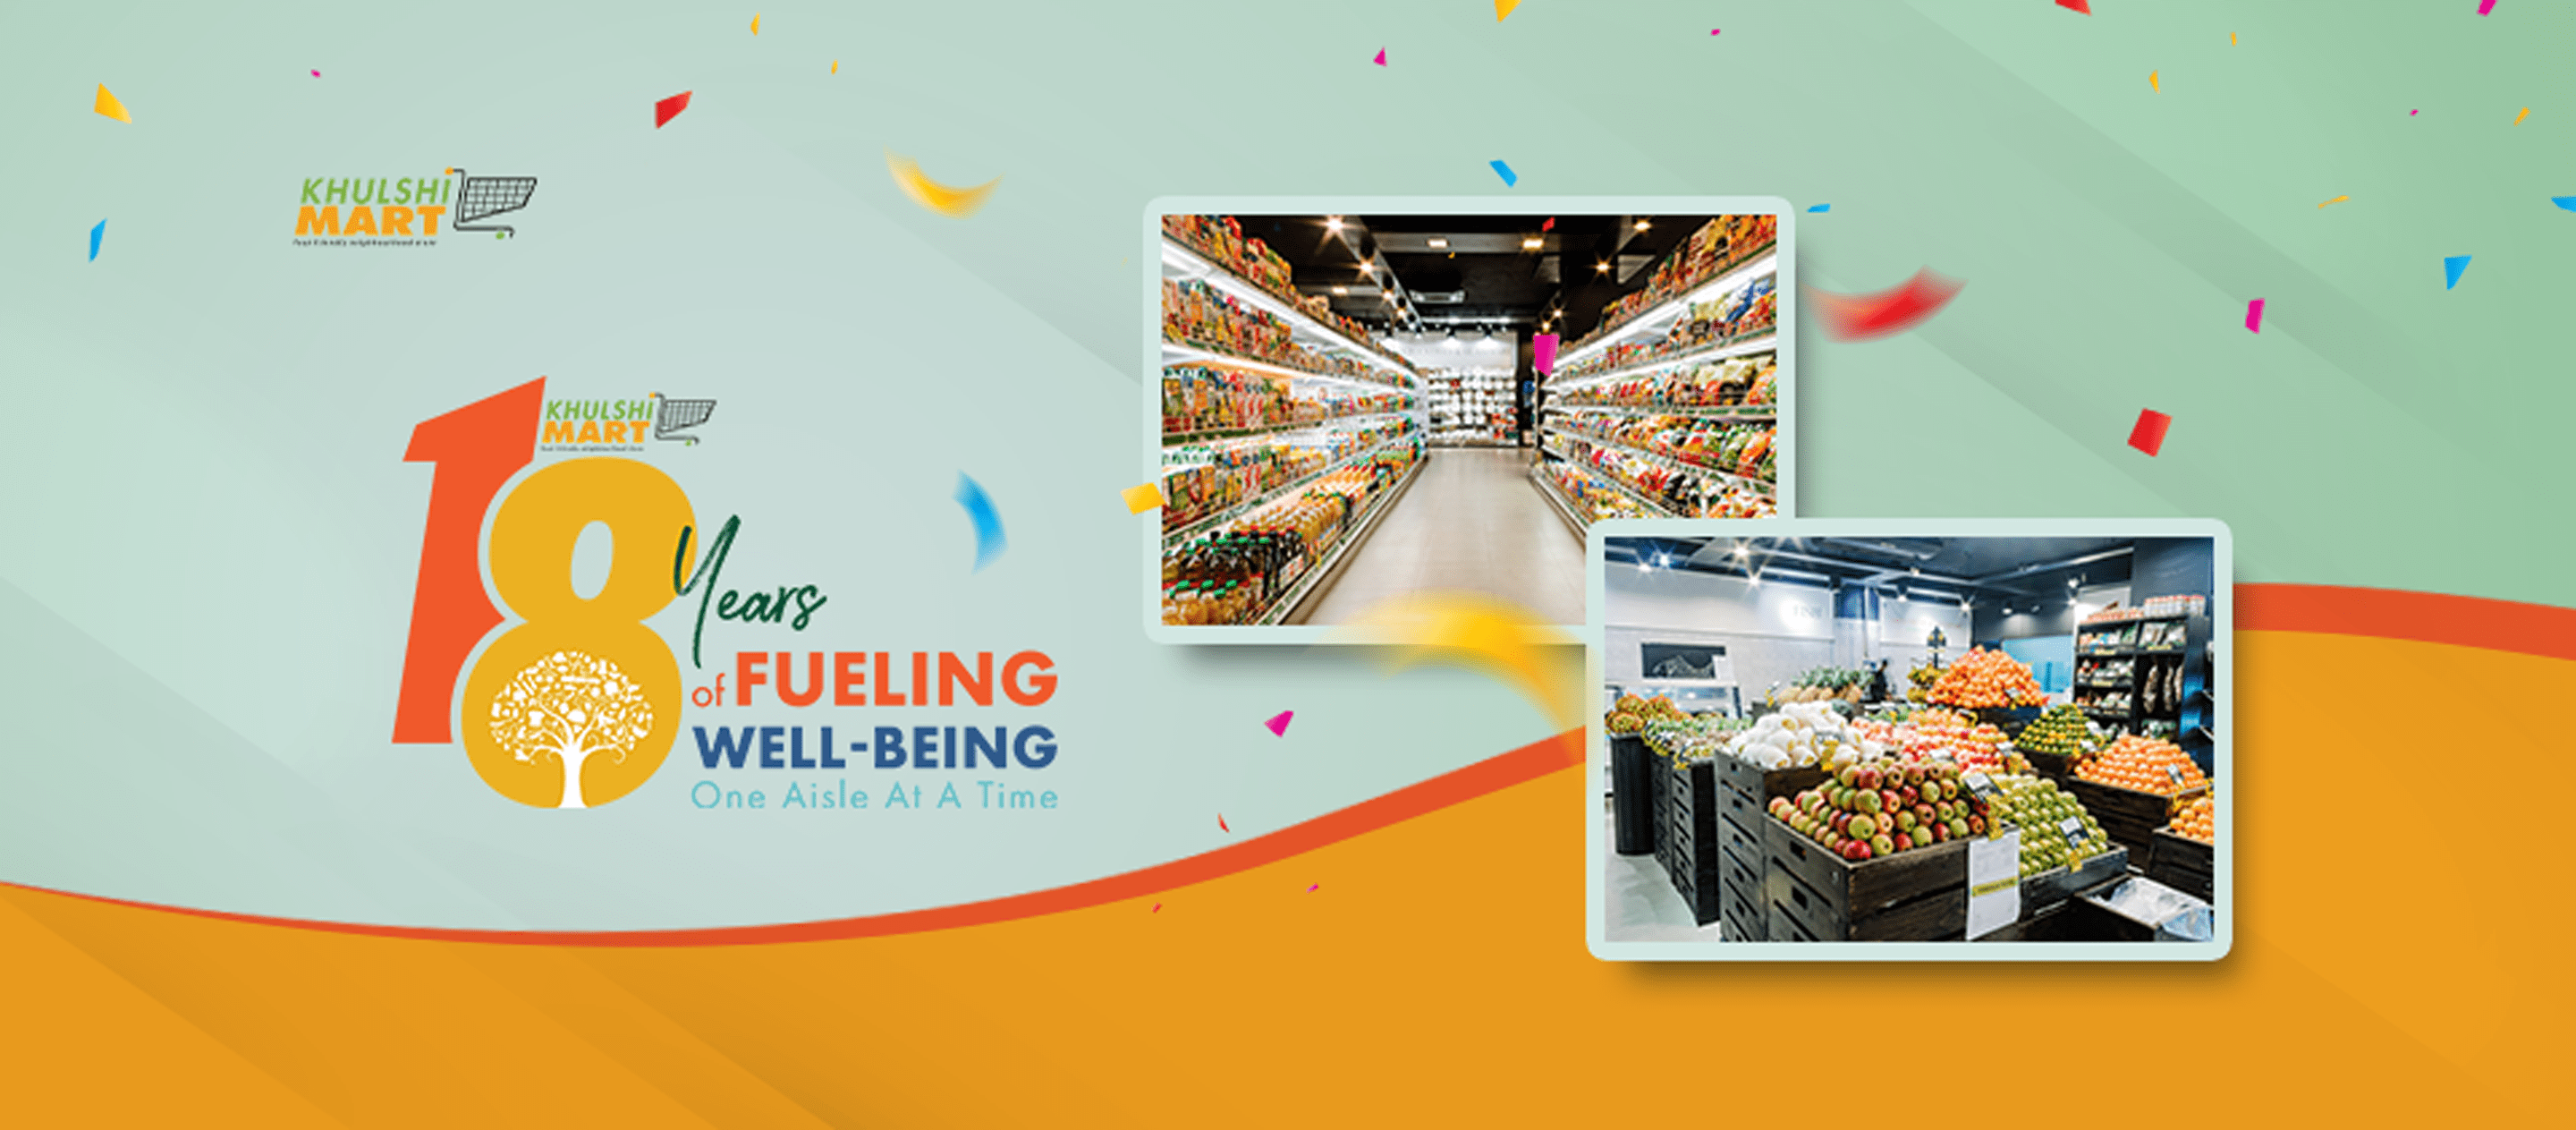 Khulshi Mart Celebrates 18 Years of Fueling Well-Being